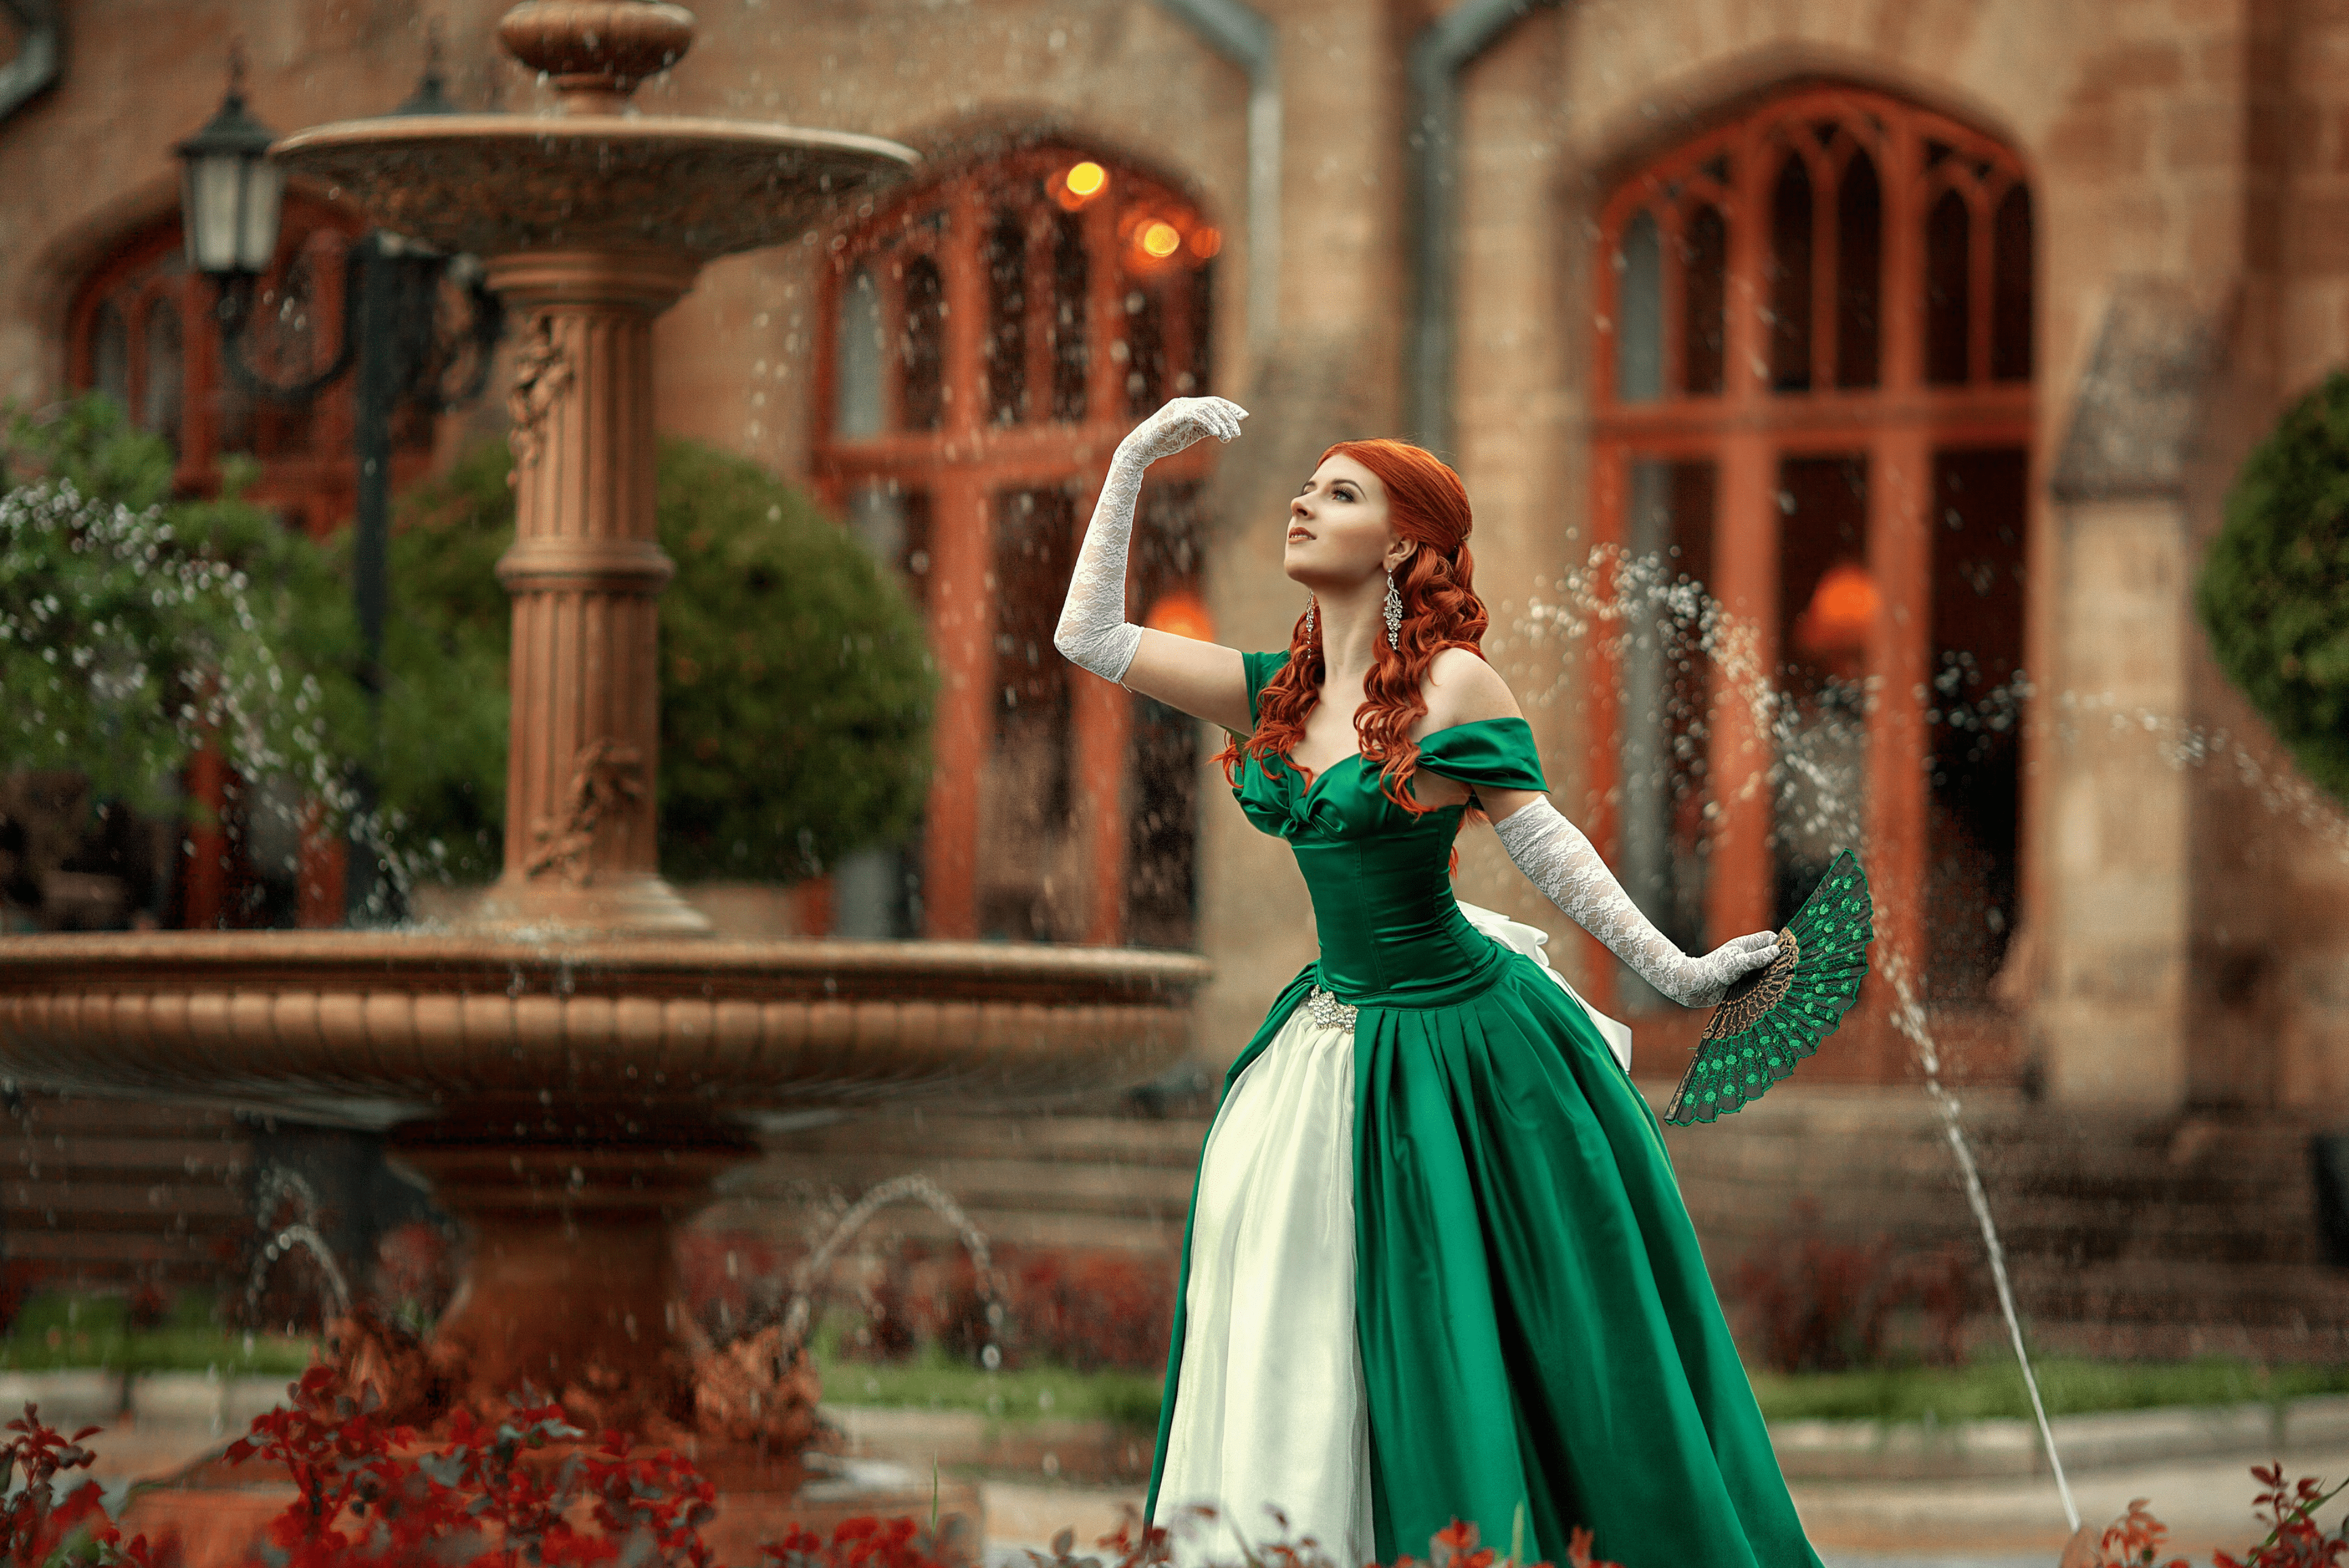 A beautiful red-haired girl in a ball gown is walking by the fountains.